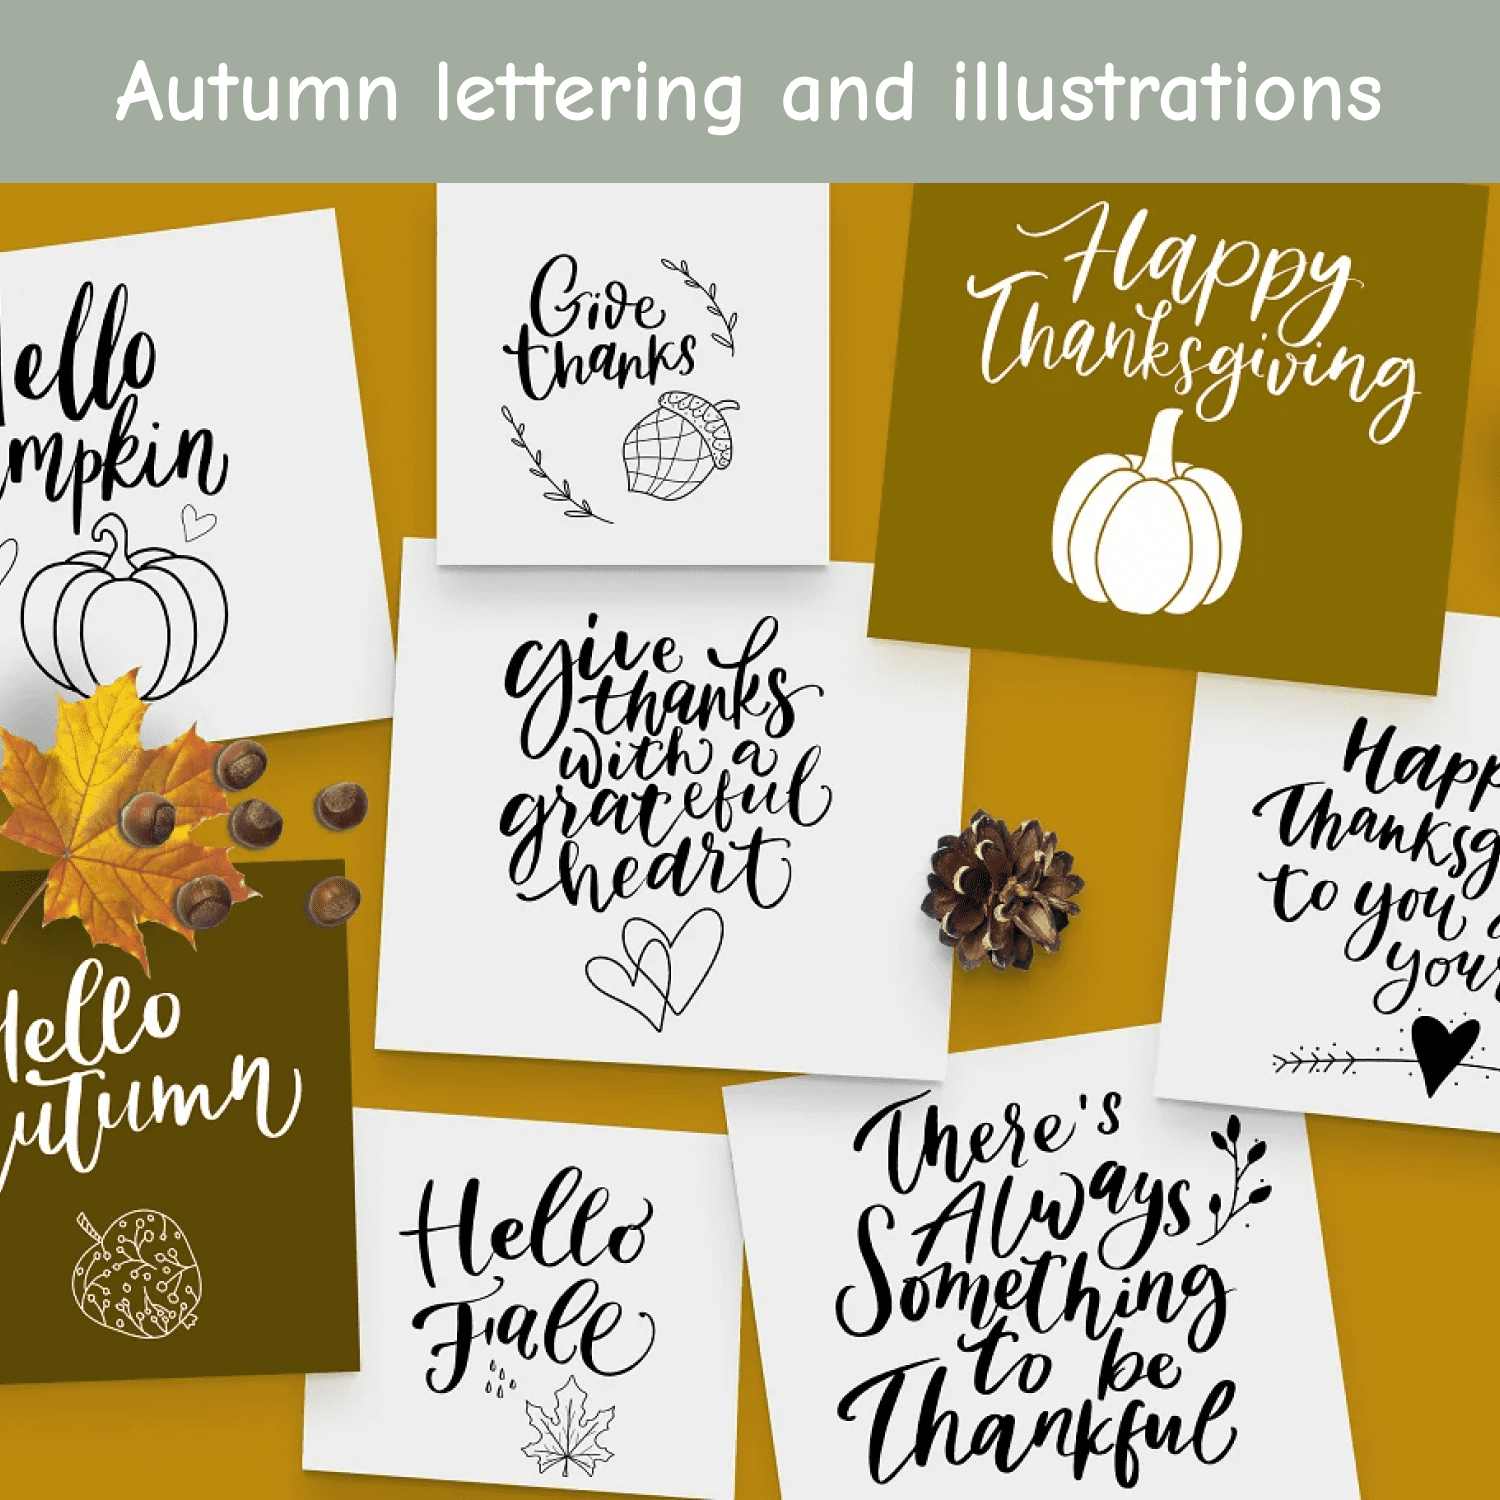 Autumn lettering and illustrations cover.